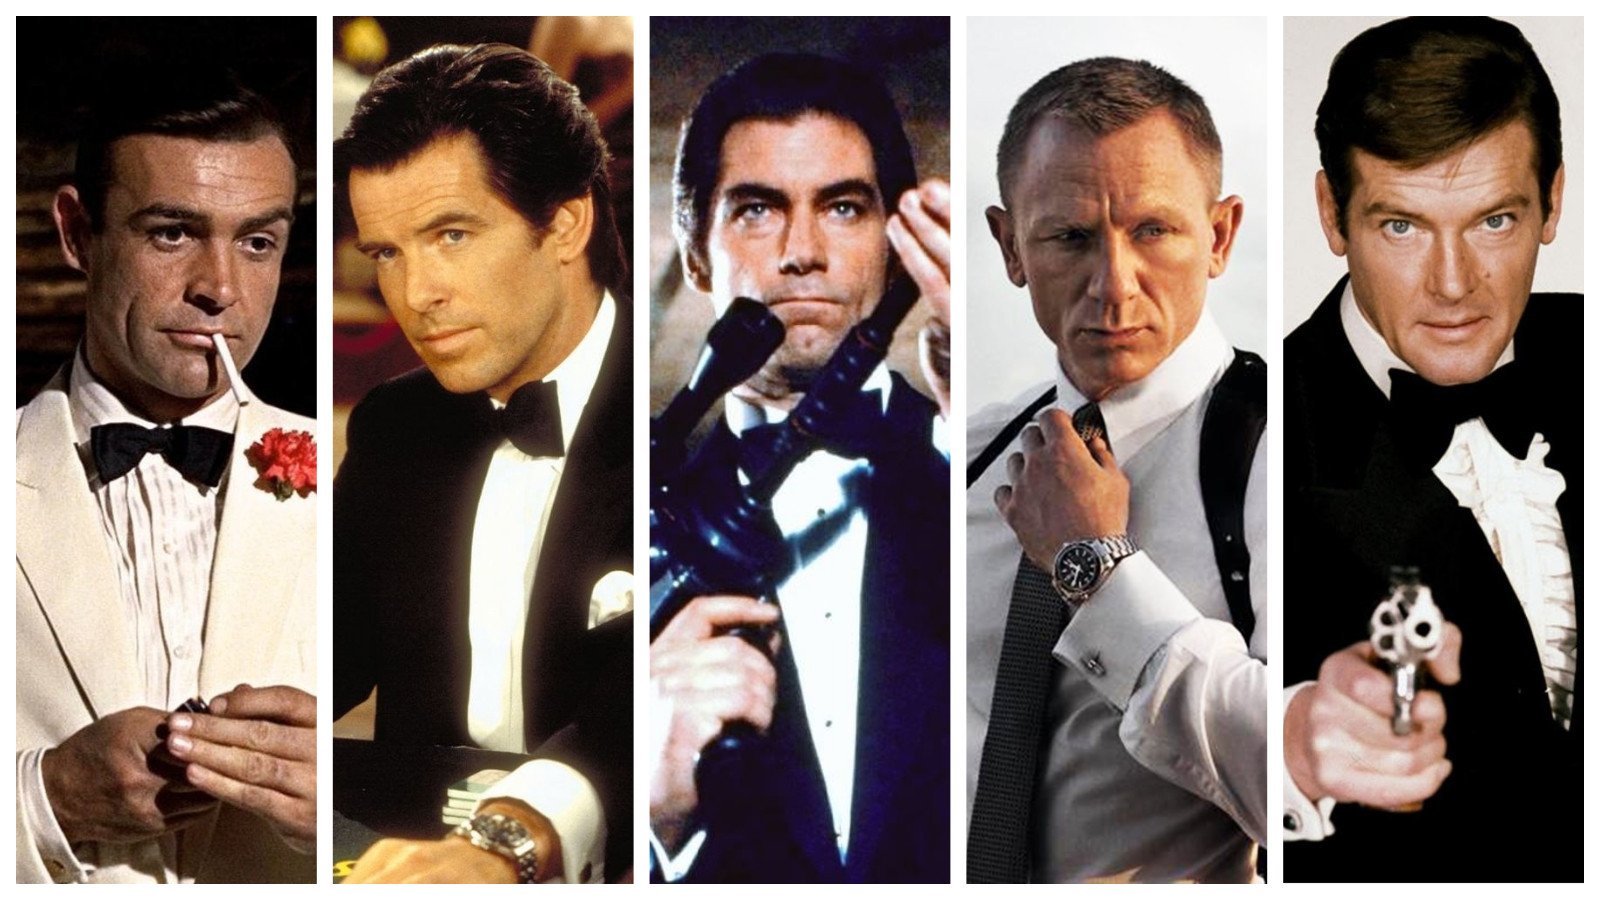 How has James Bond’s style changed over the years? Here’s how actors Sean Connery, Pierce Brosnan, Timothy Dalton, Daniel Craig and Roger Moore dressed while portraying the iconic 007. Photos: @FilmEasterEggs, @007, @Masquerade2376, @tiernysimon/Twitter; Sony Pictures